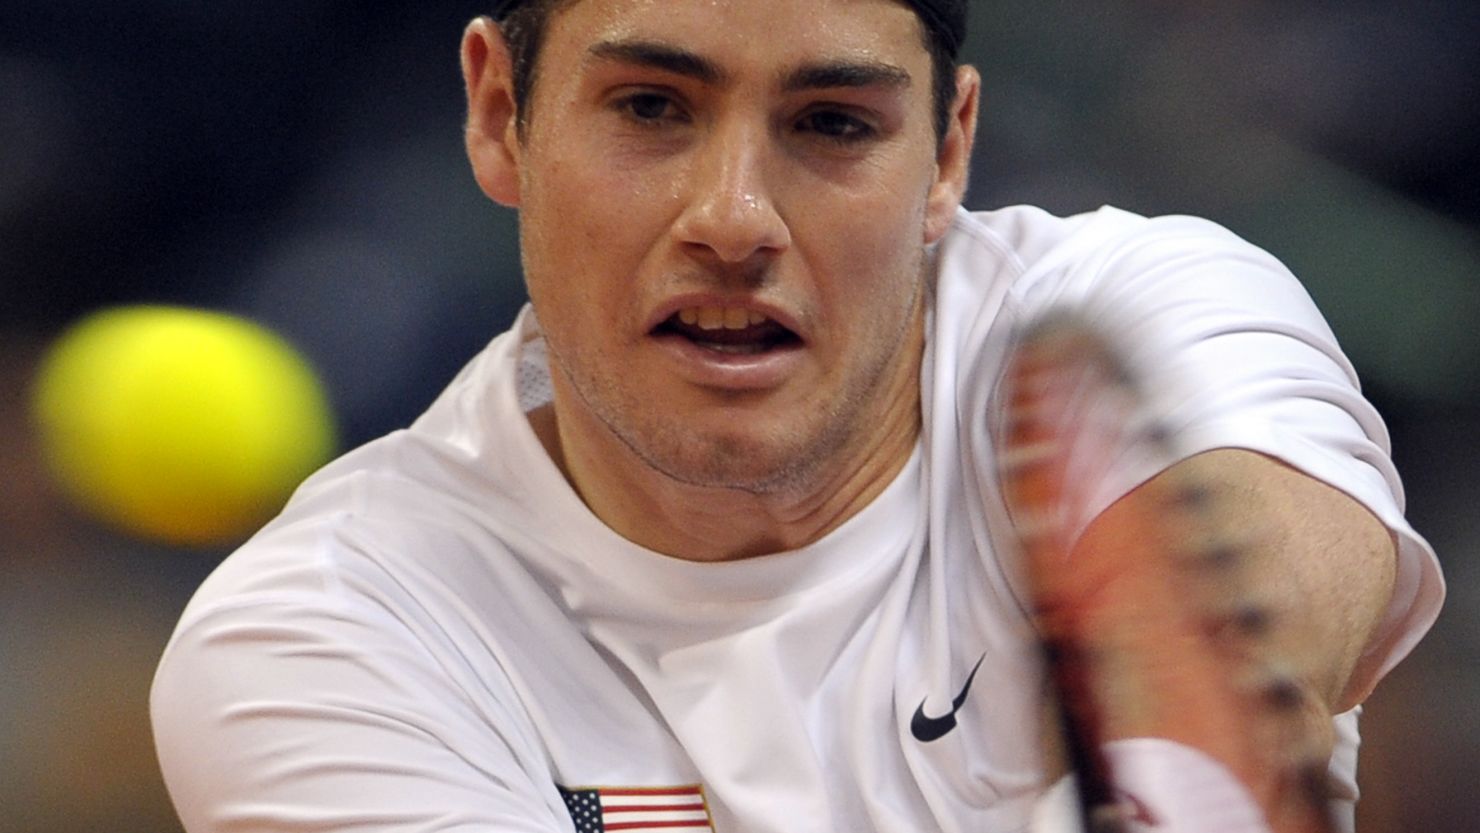 John Isner played the match of his life to beat Roger Federer in their Davis Cup tie.